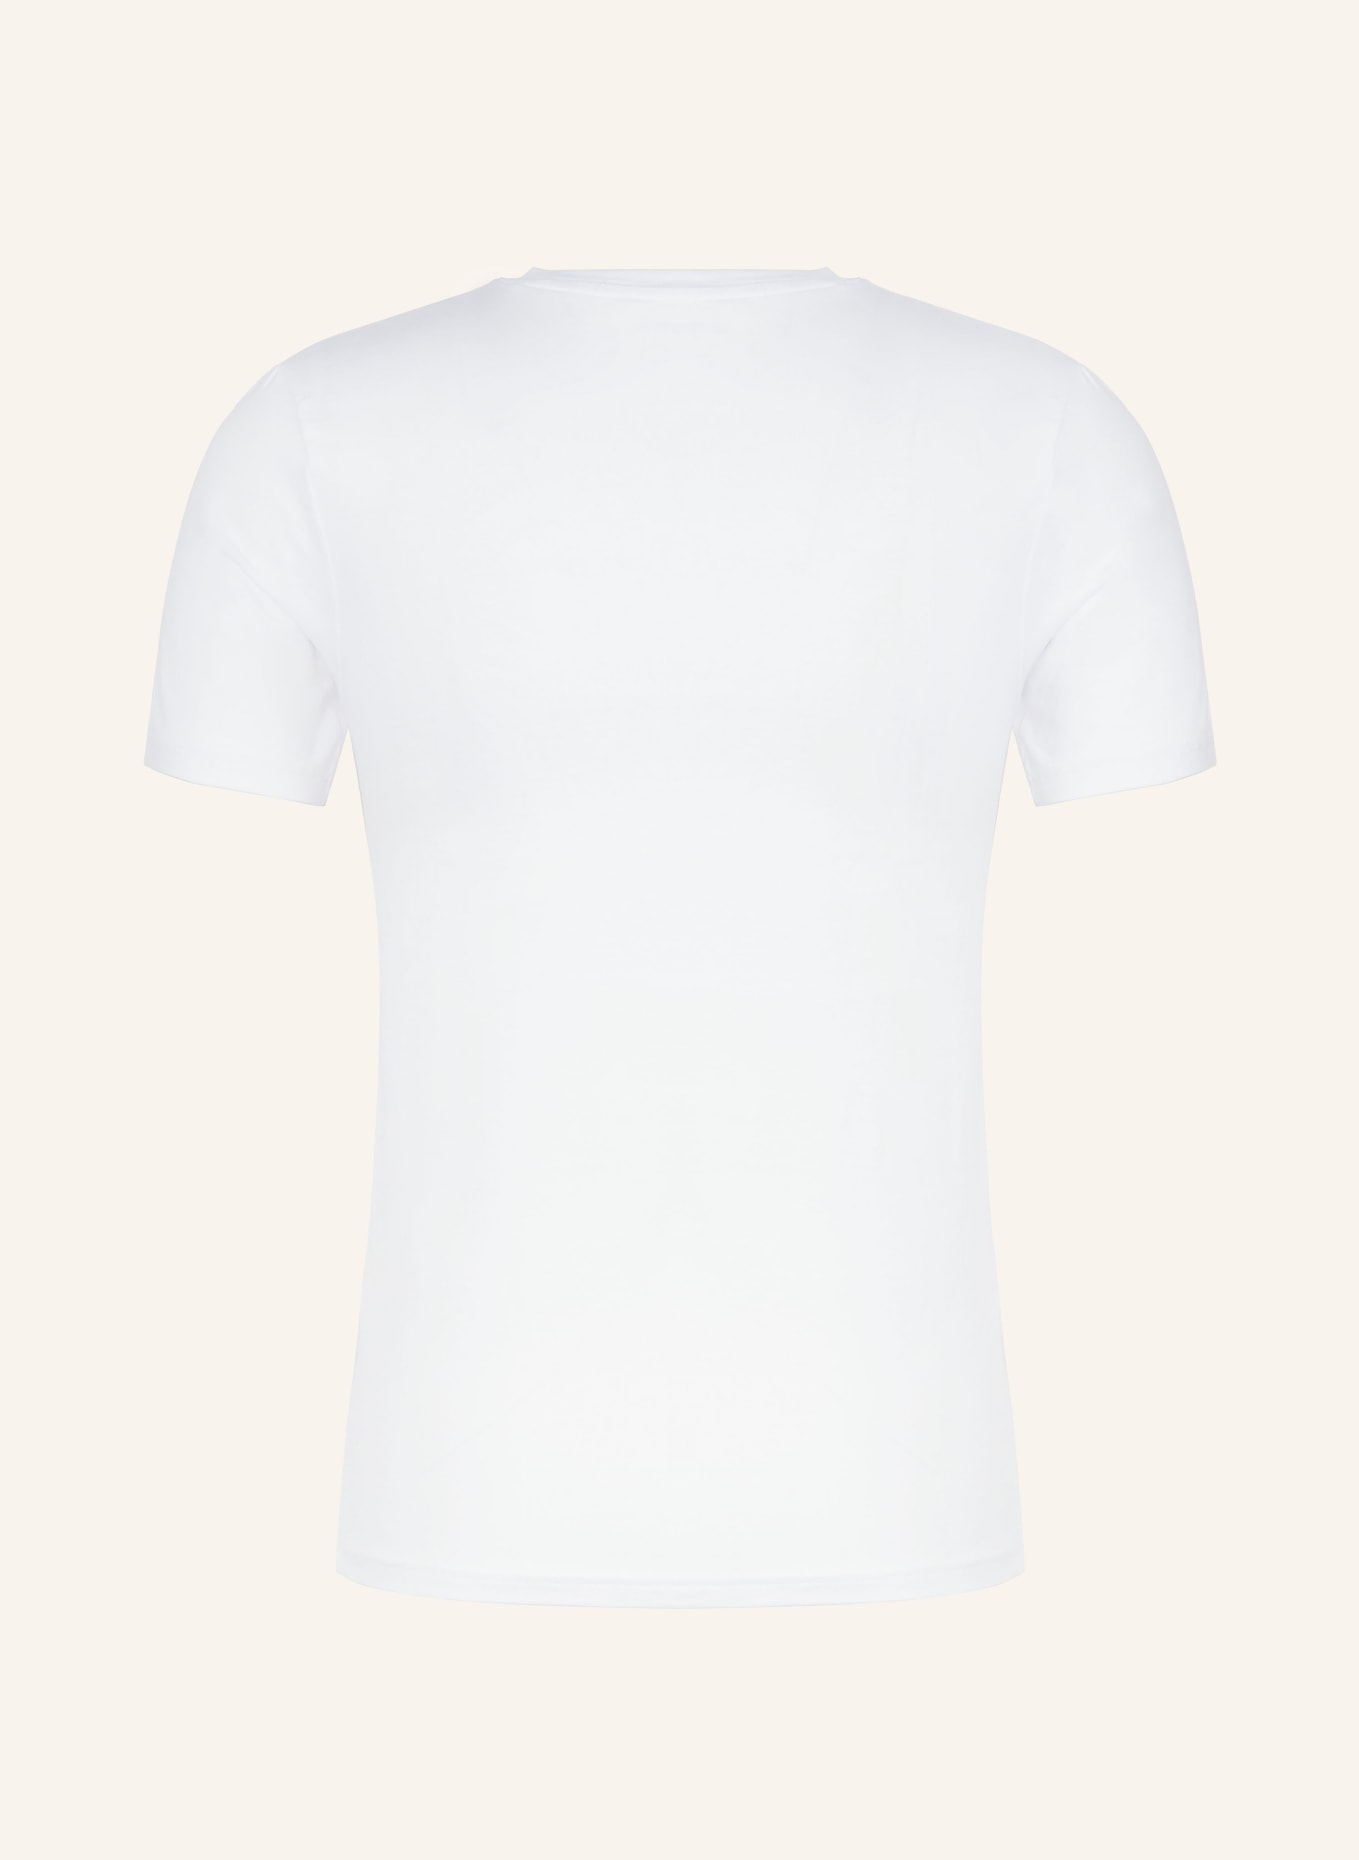 Marc O'Polo 2er-Pack V-Shirts, Farbe: WEISS (Bild 2)